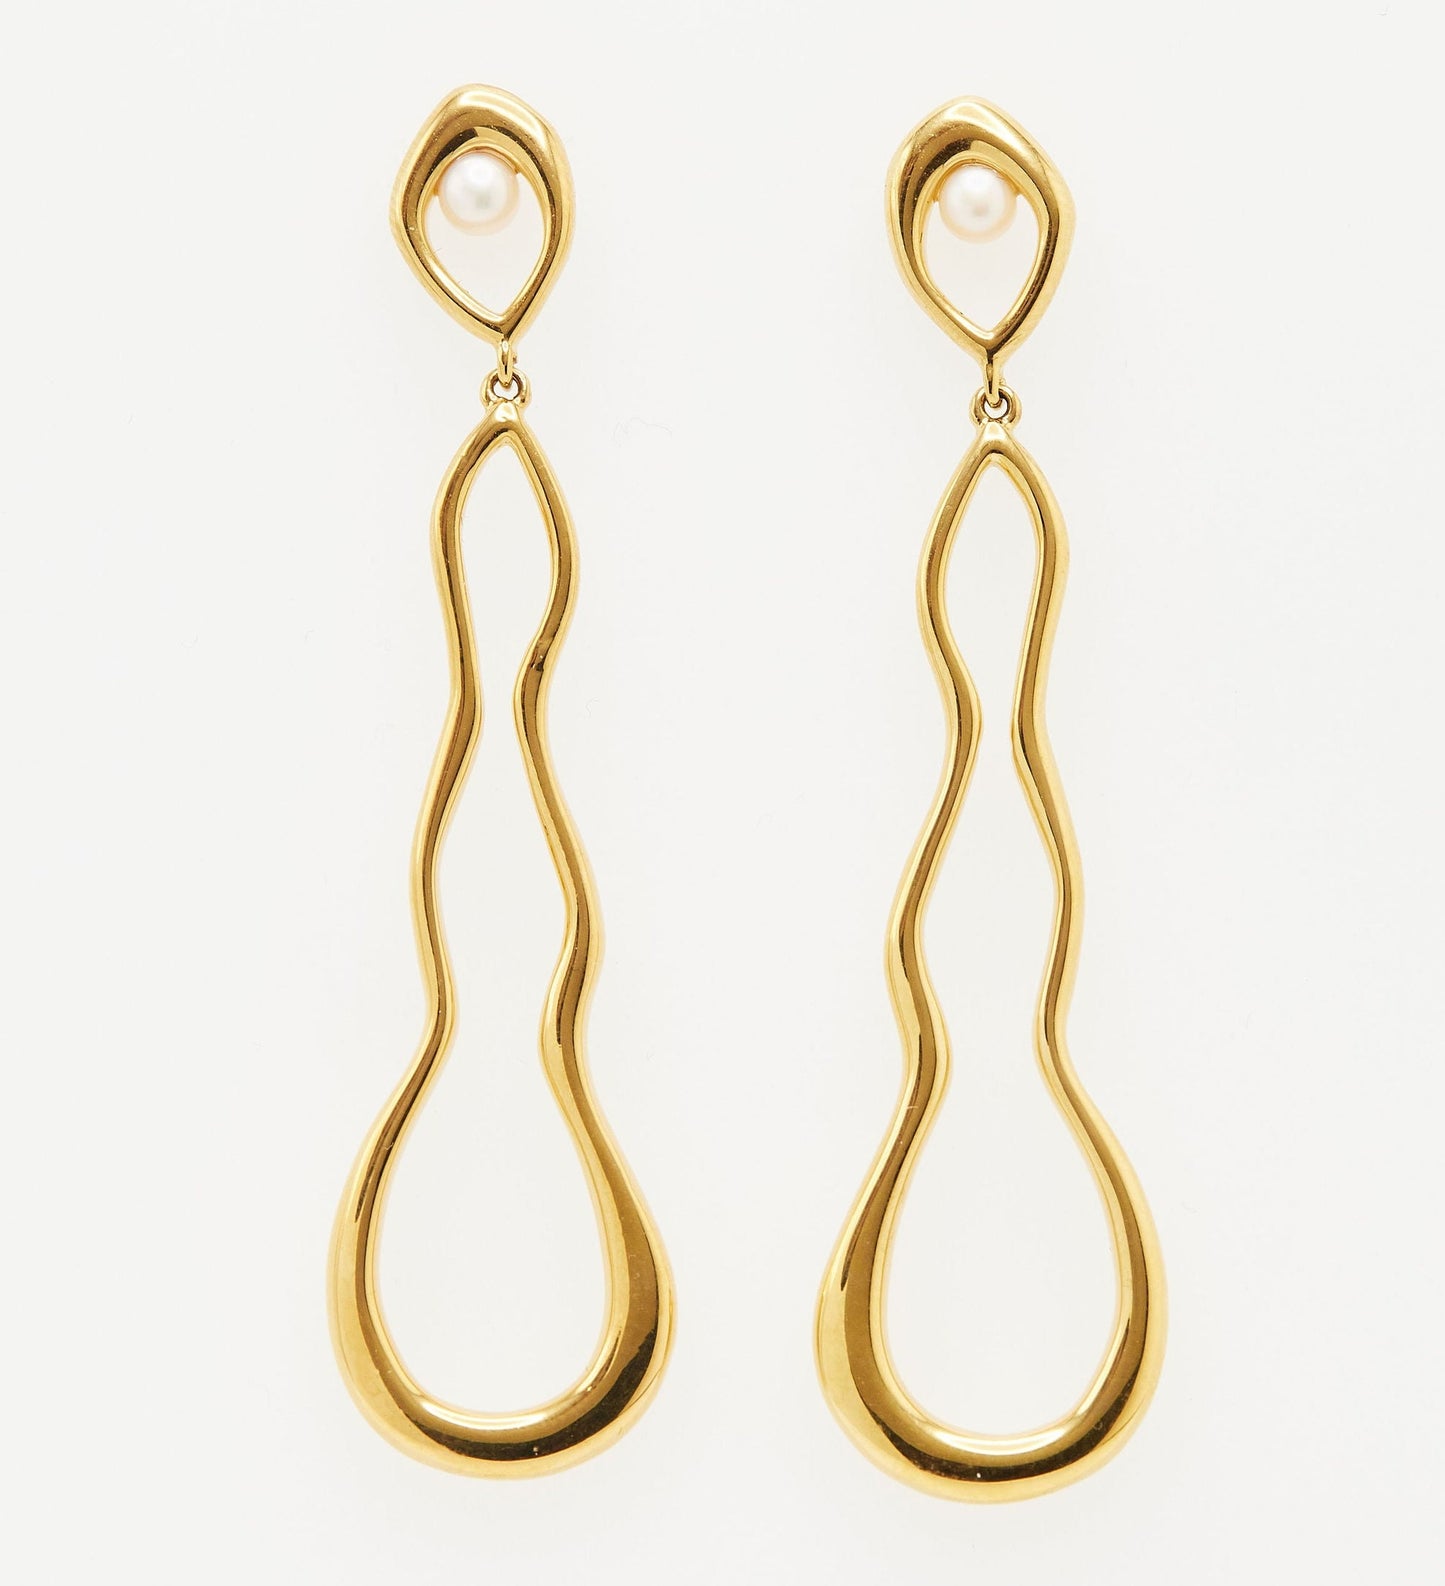 elongated squiggle outline gold earrings with small pearl accent on white background